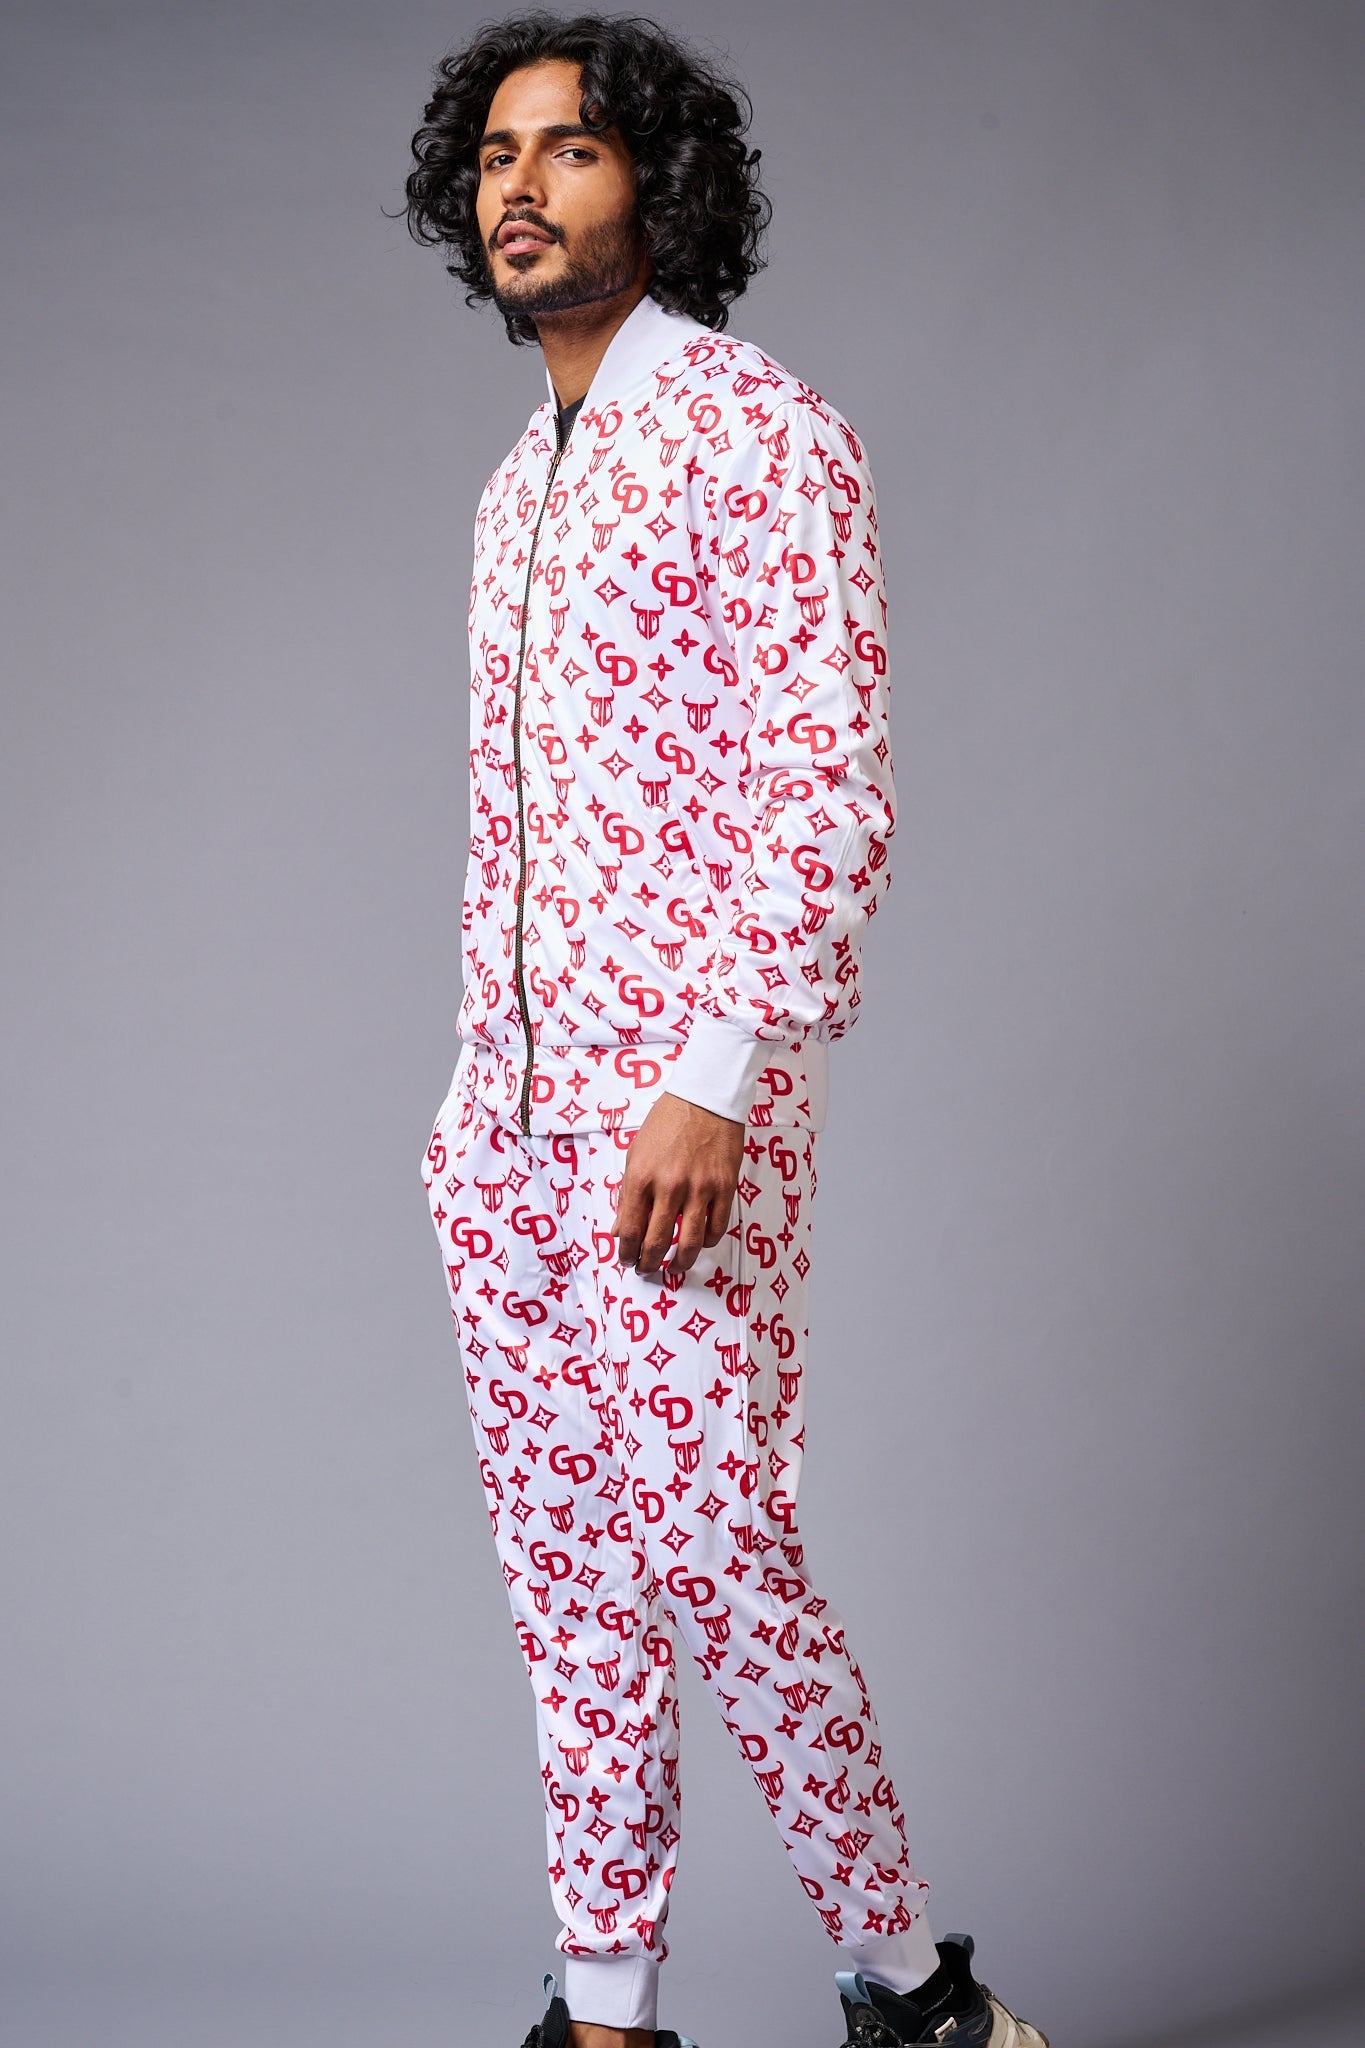 GD Logo (in red) Printed White Bomber Style Jacket with Pant Co-ord Set for Men - Go Devil